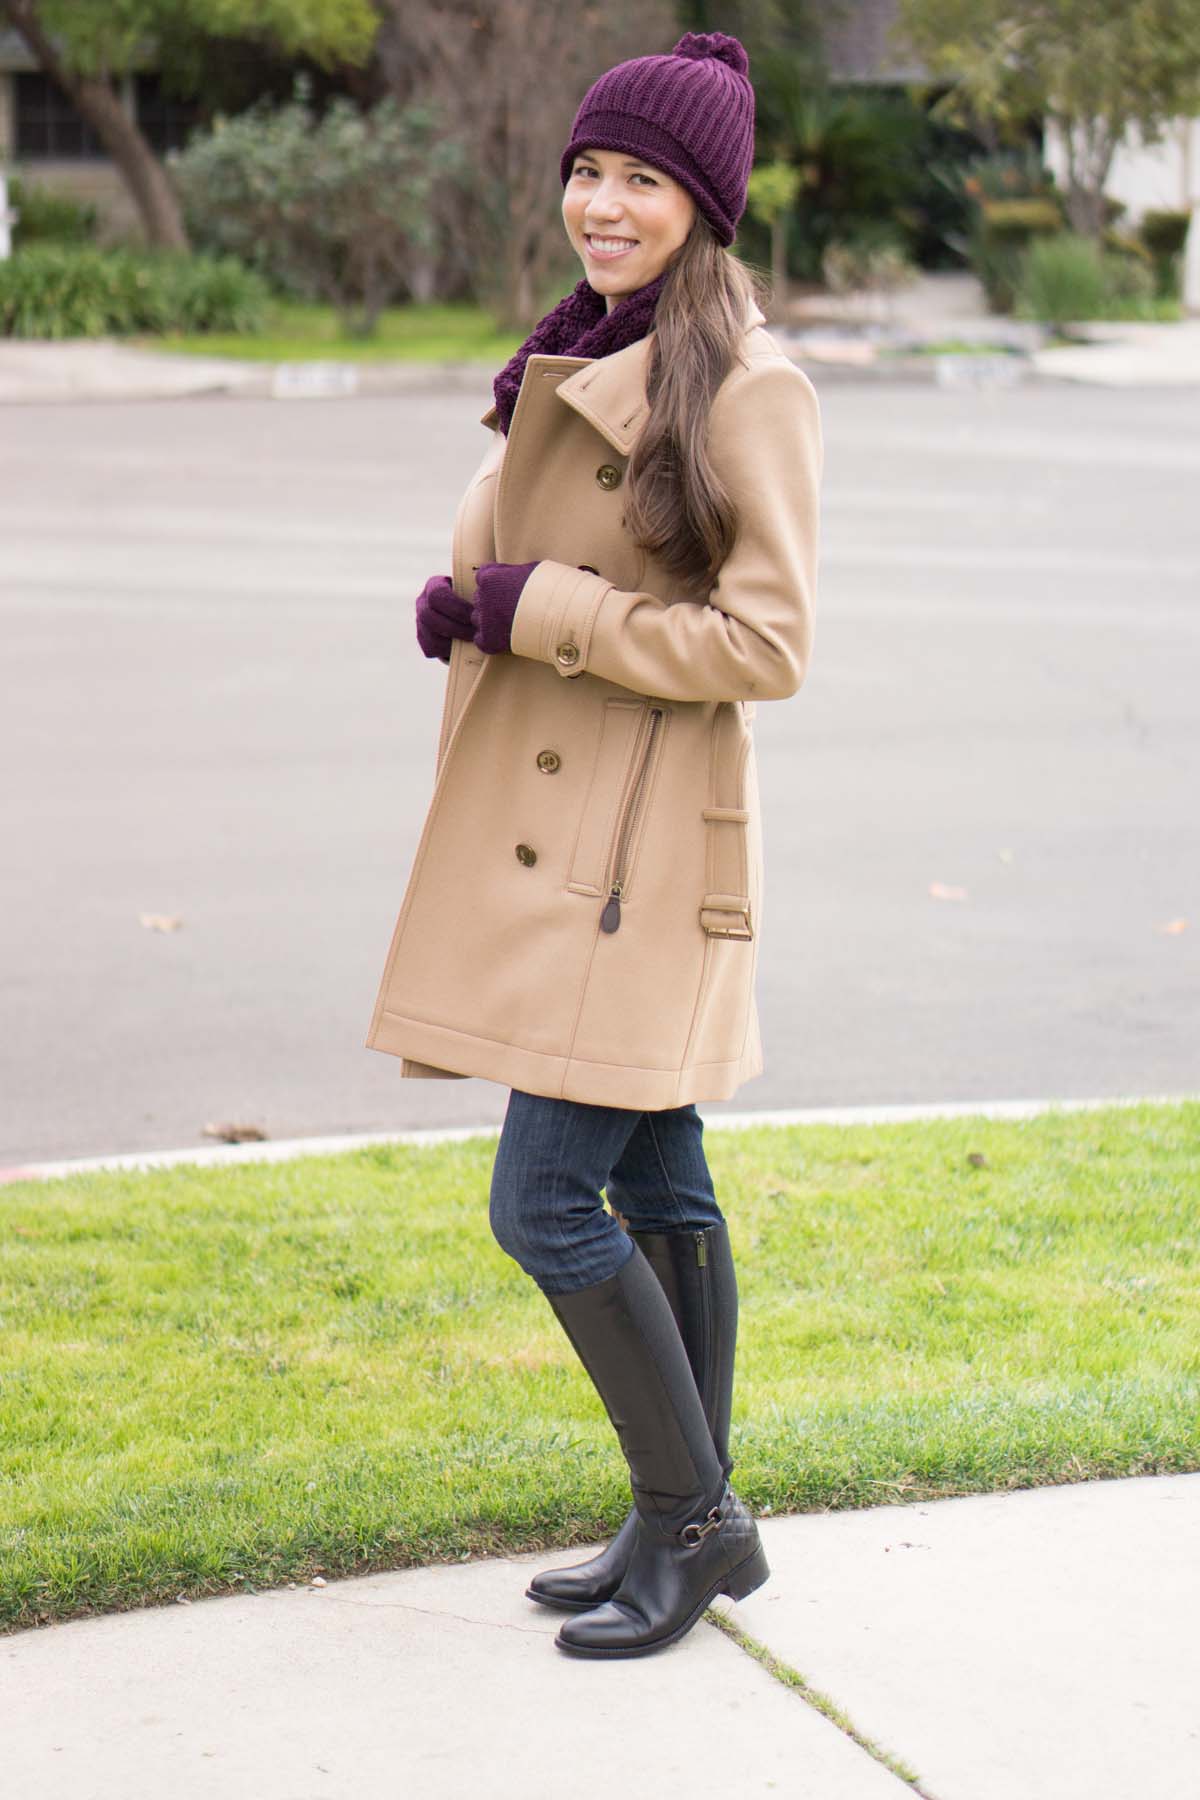 The Company Store Review | Winter Accessories | Baby Alpaca Waffle Knit Hat Gloves Scarf | Burberry Daylesmoore Wool Coat | Ann Taylor Jacket